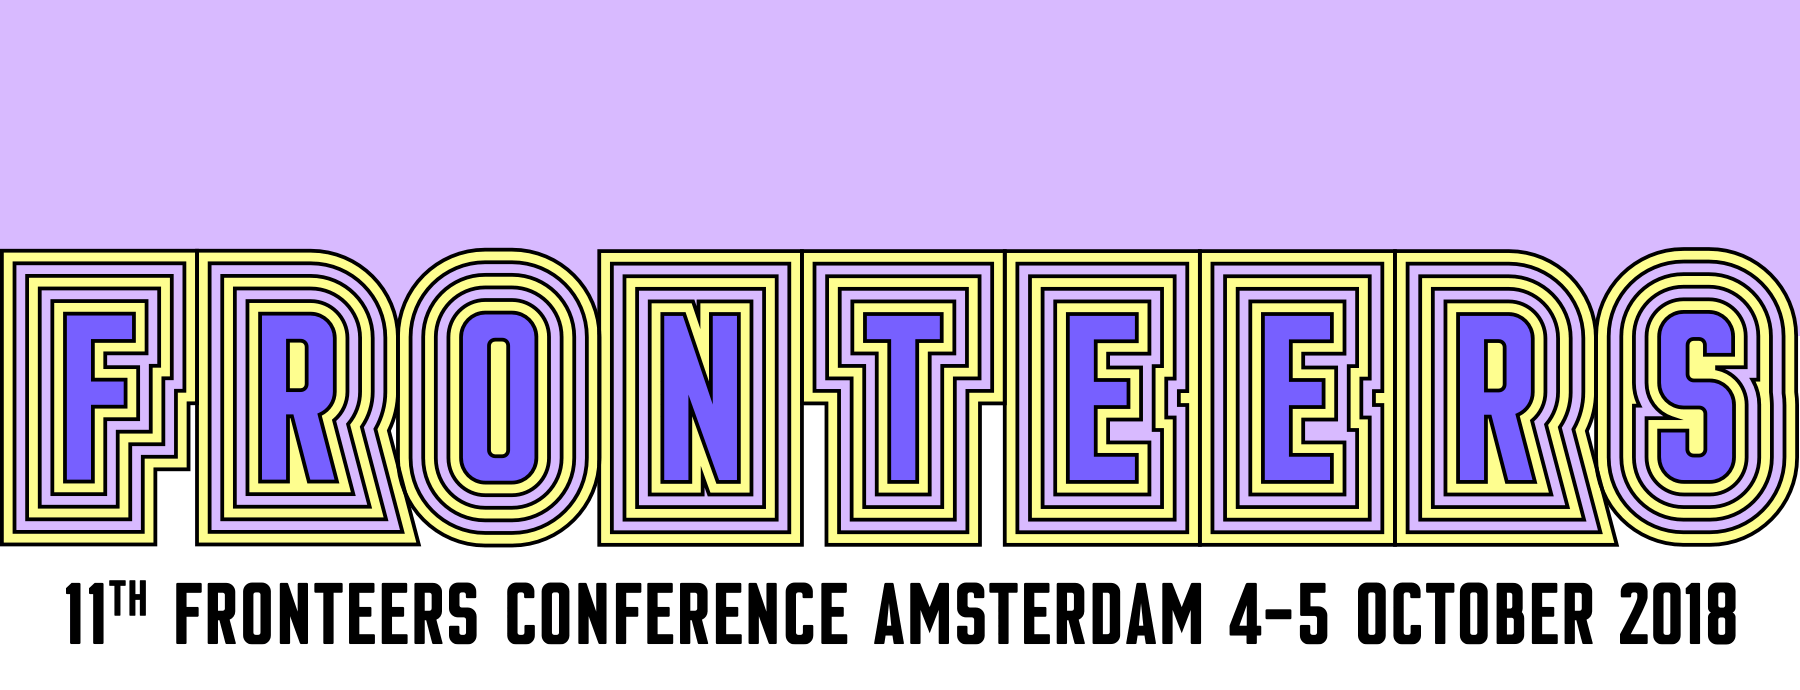 Fronteers, 11th Fronteers Conference Amsterdam 4-5 October 2018